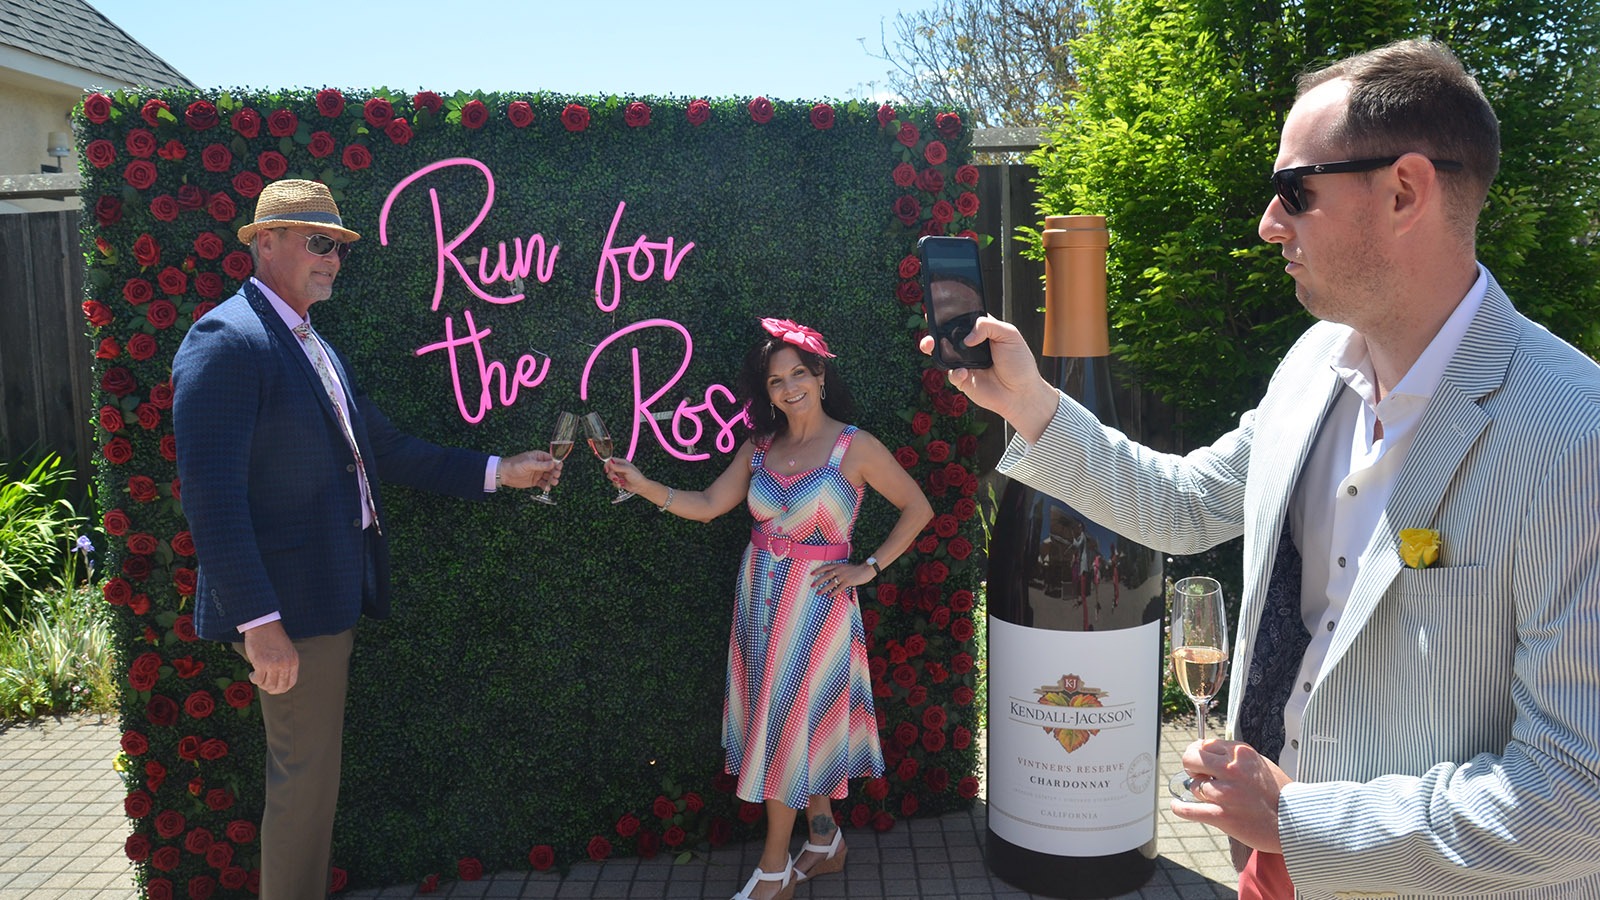 Couple poses in front of sign for Kendall-Jackson Wine Estate's Kentucky Derby party in Sonoma County, California.